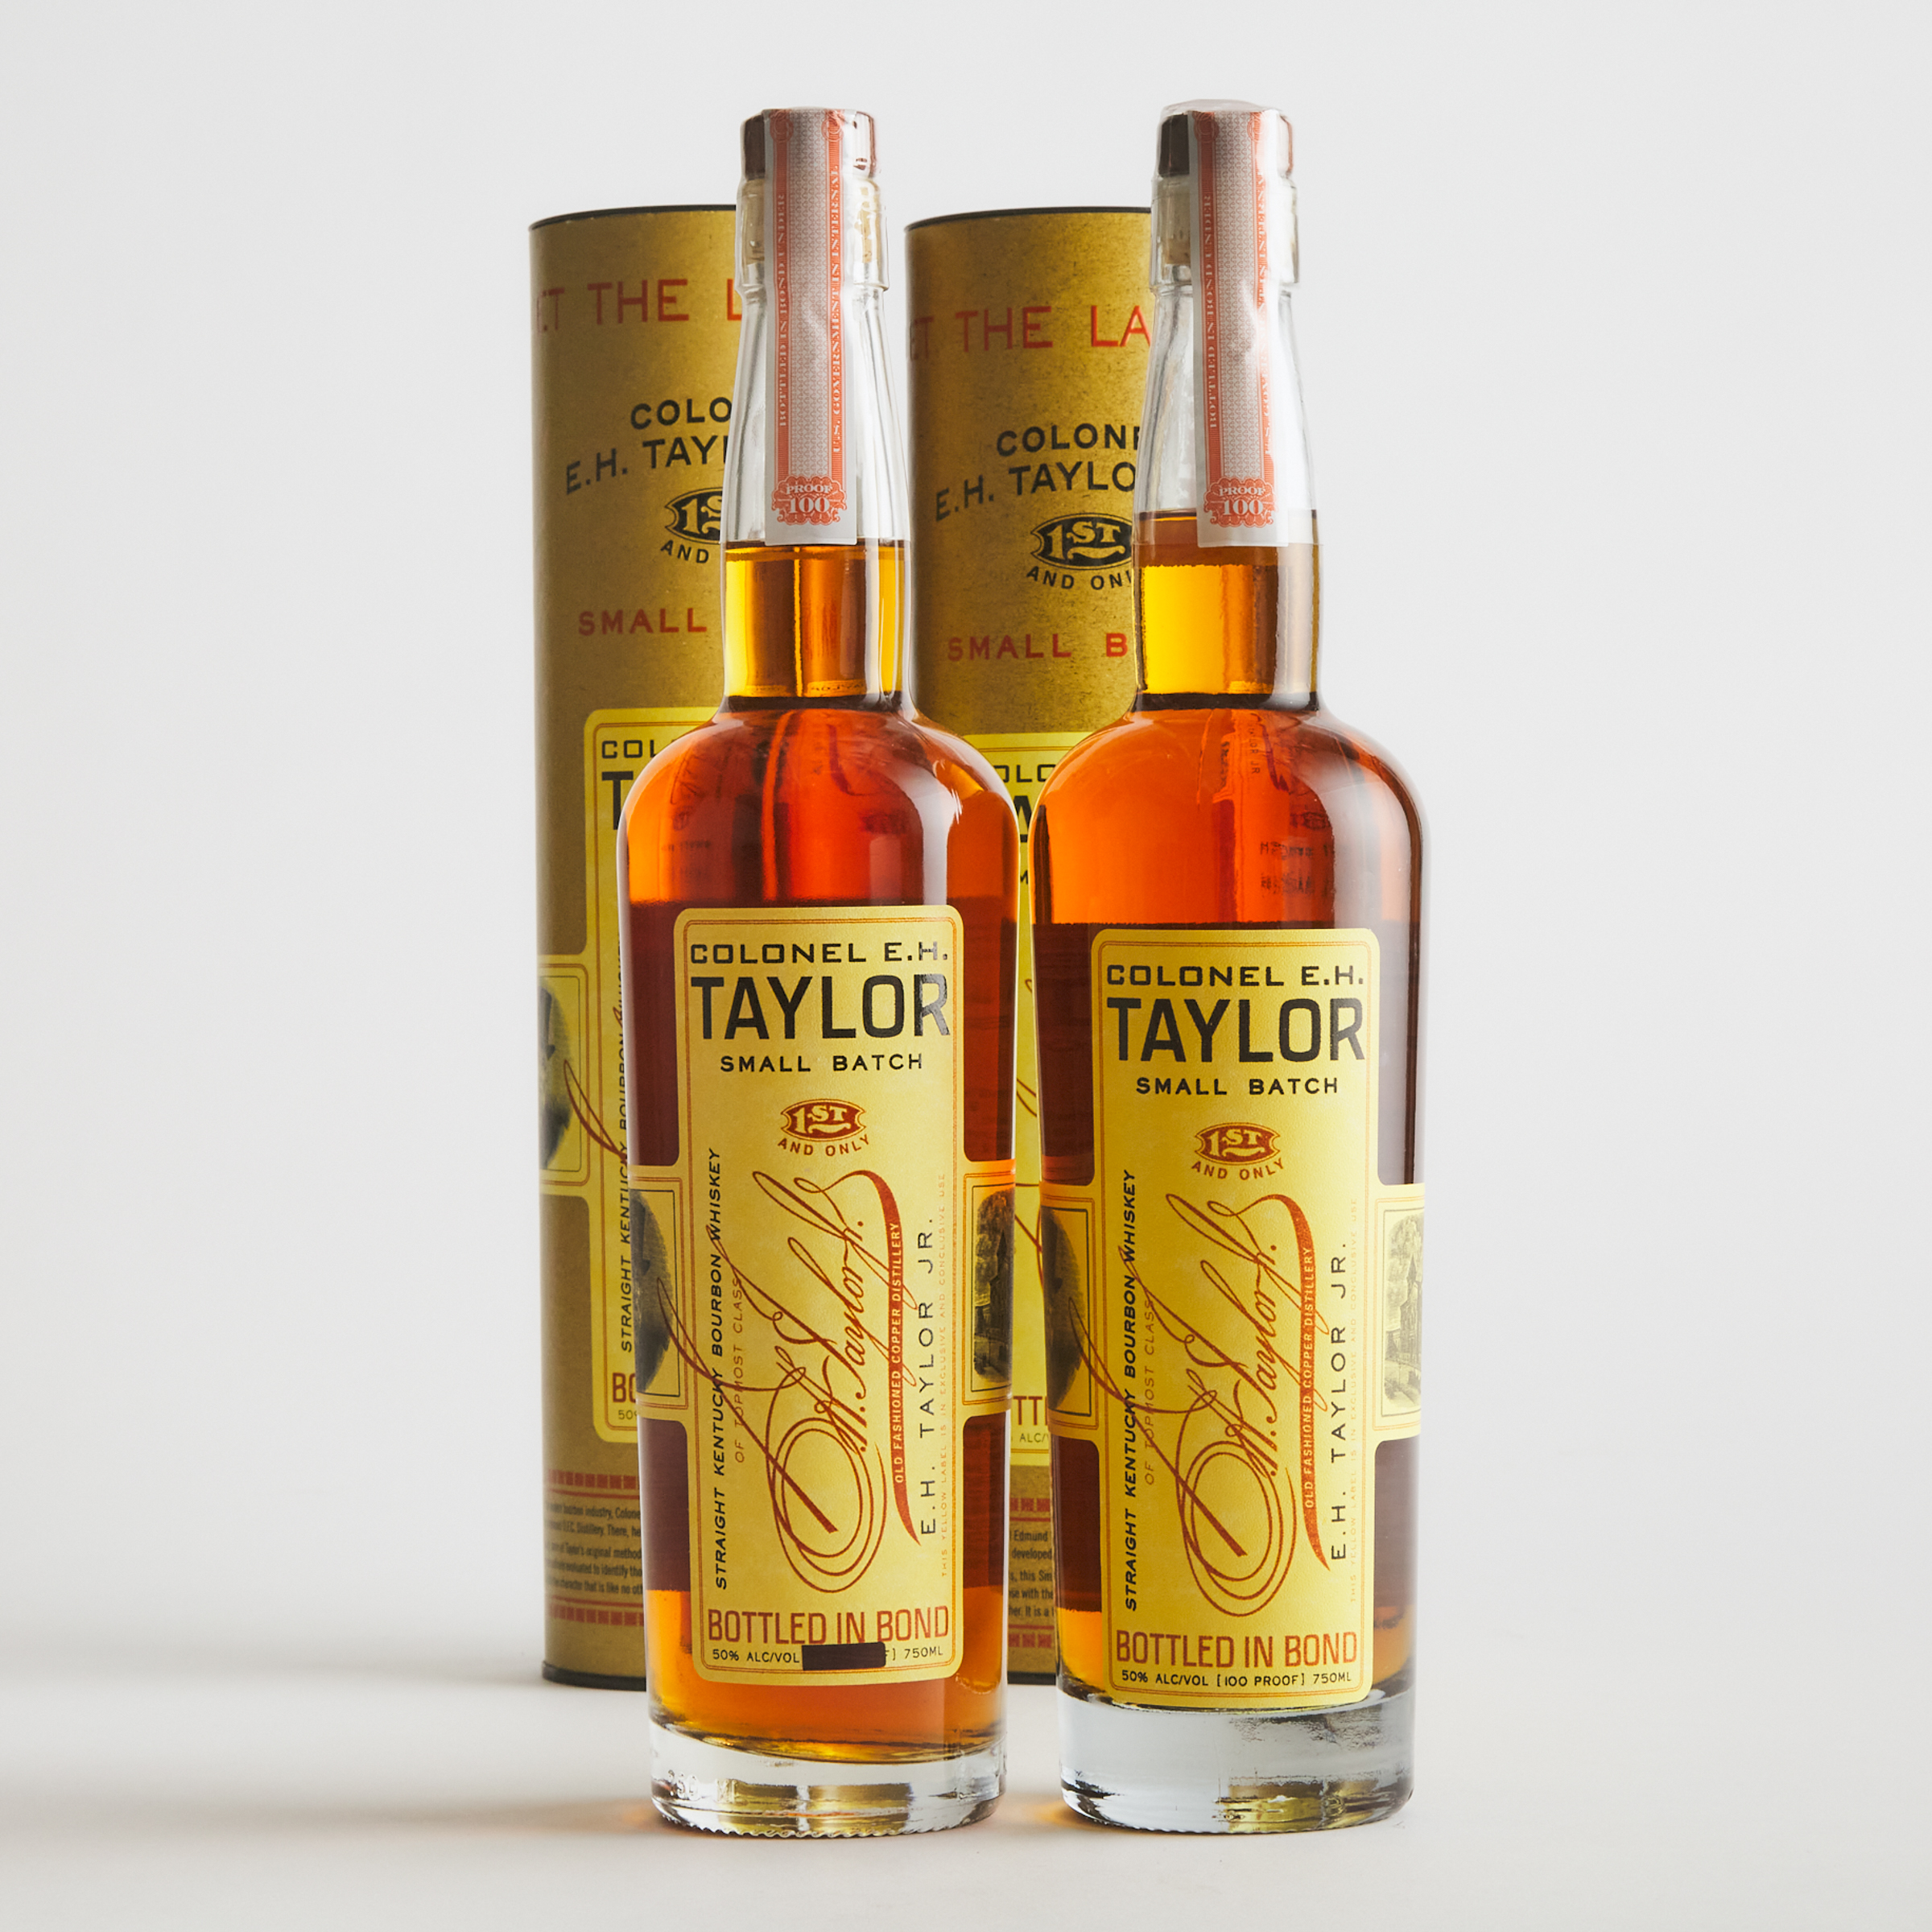 COLONEL E.H. TAYLOR JR. SMALL BATCH STRAIGHT KENTUCKY BOURBON WHISKEY (TWO 750 ML)